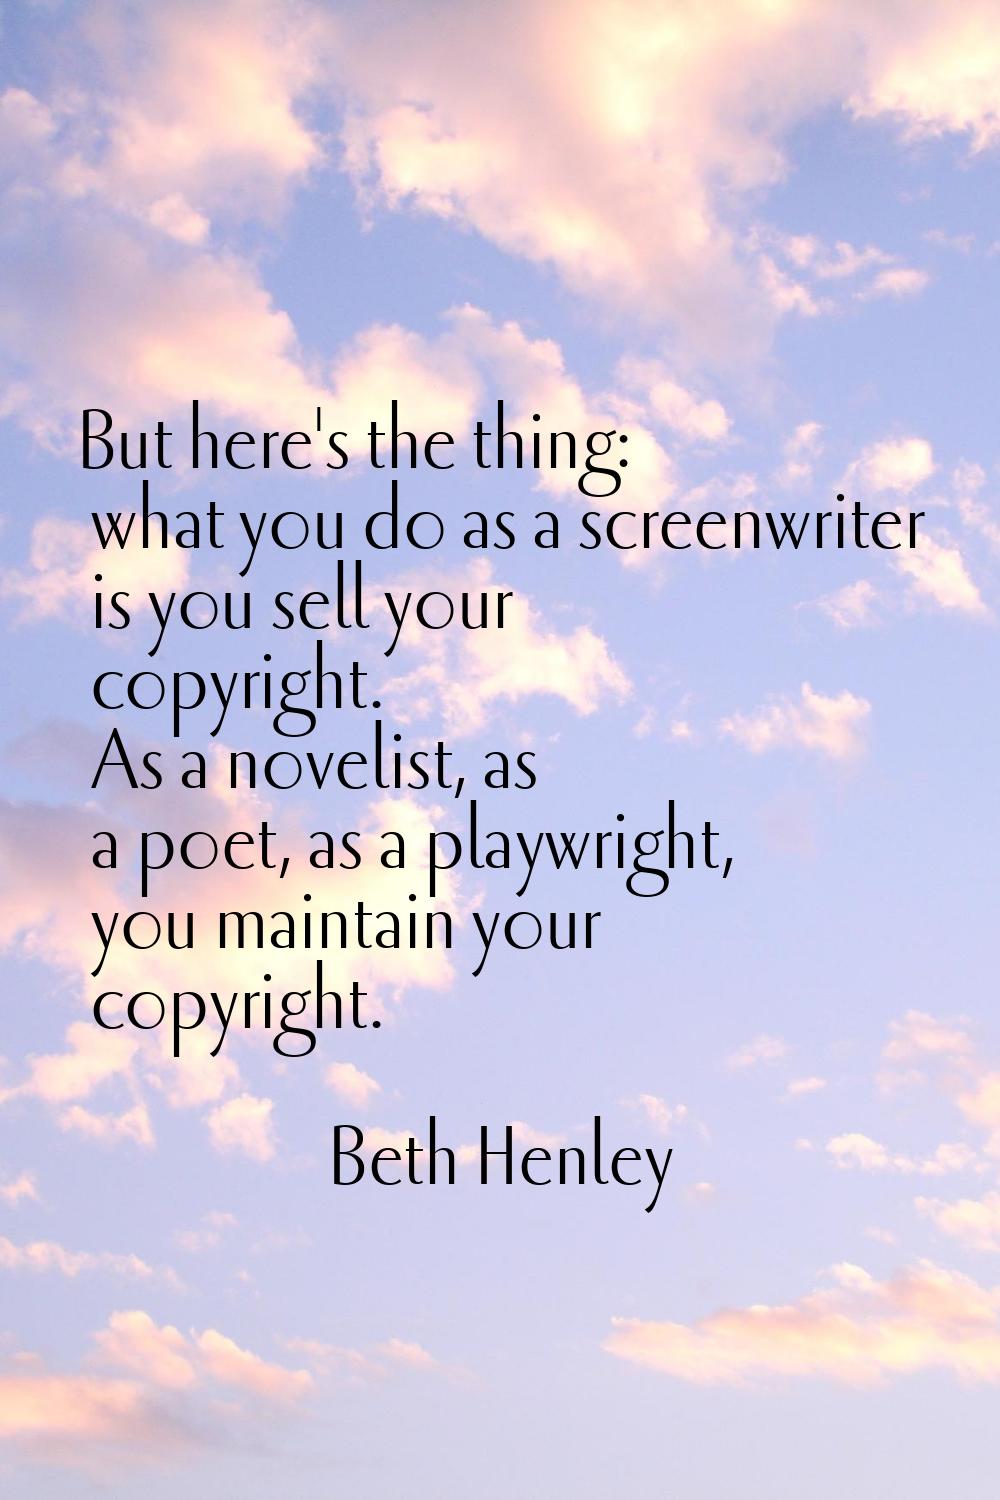 But here's the thing: what you do as a screenwriter is you sell your copyright. As a novelist, as a